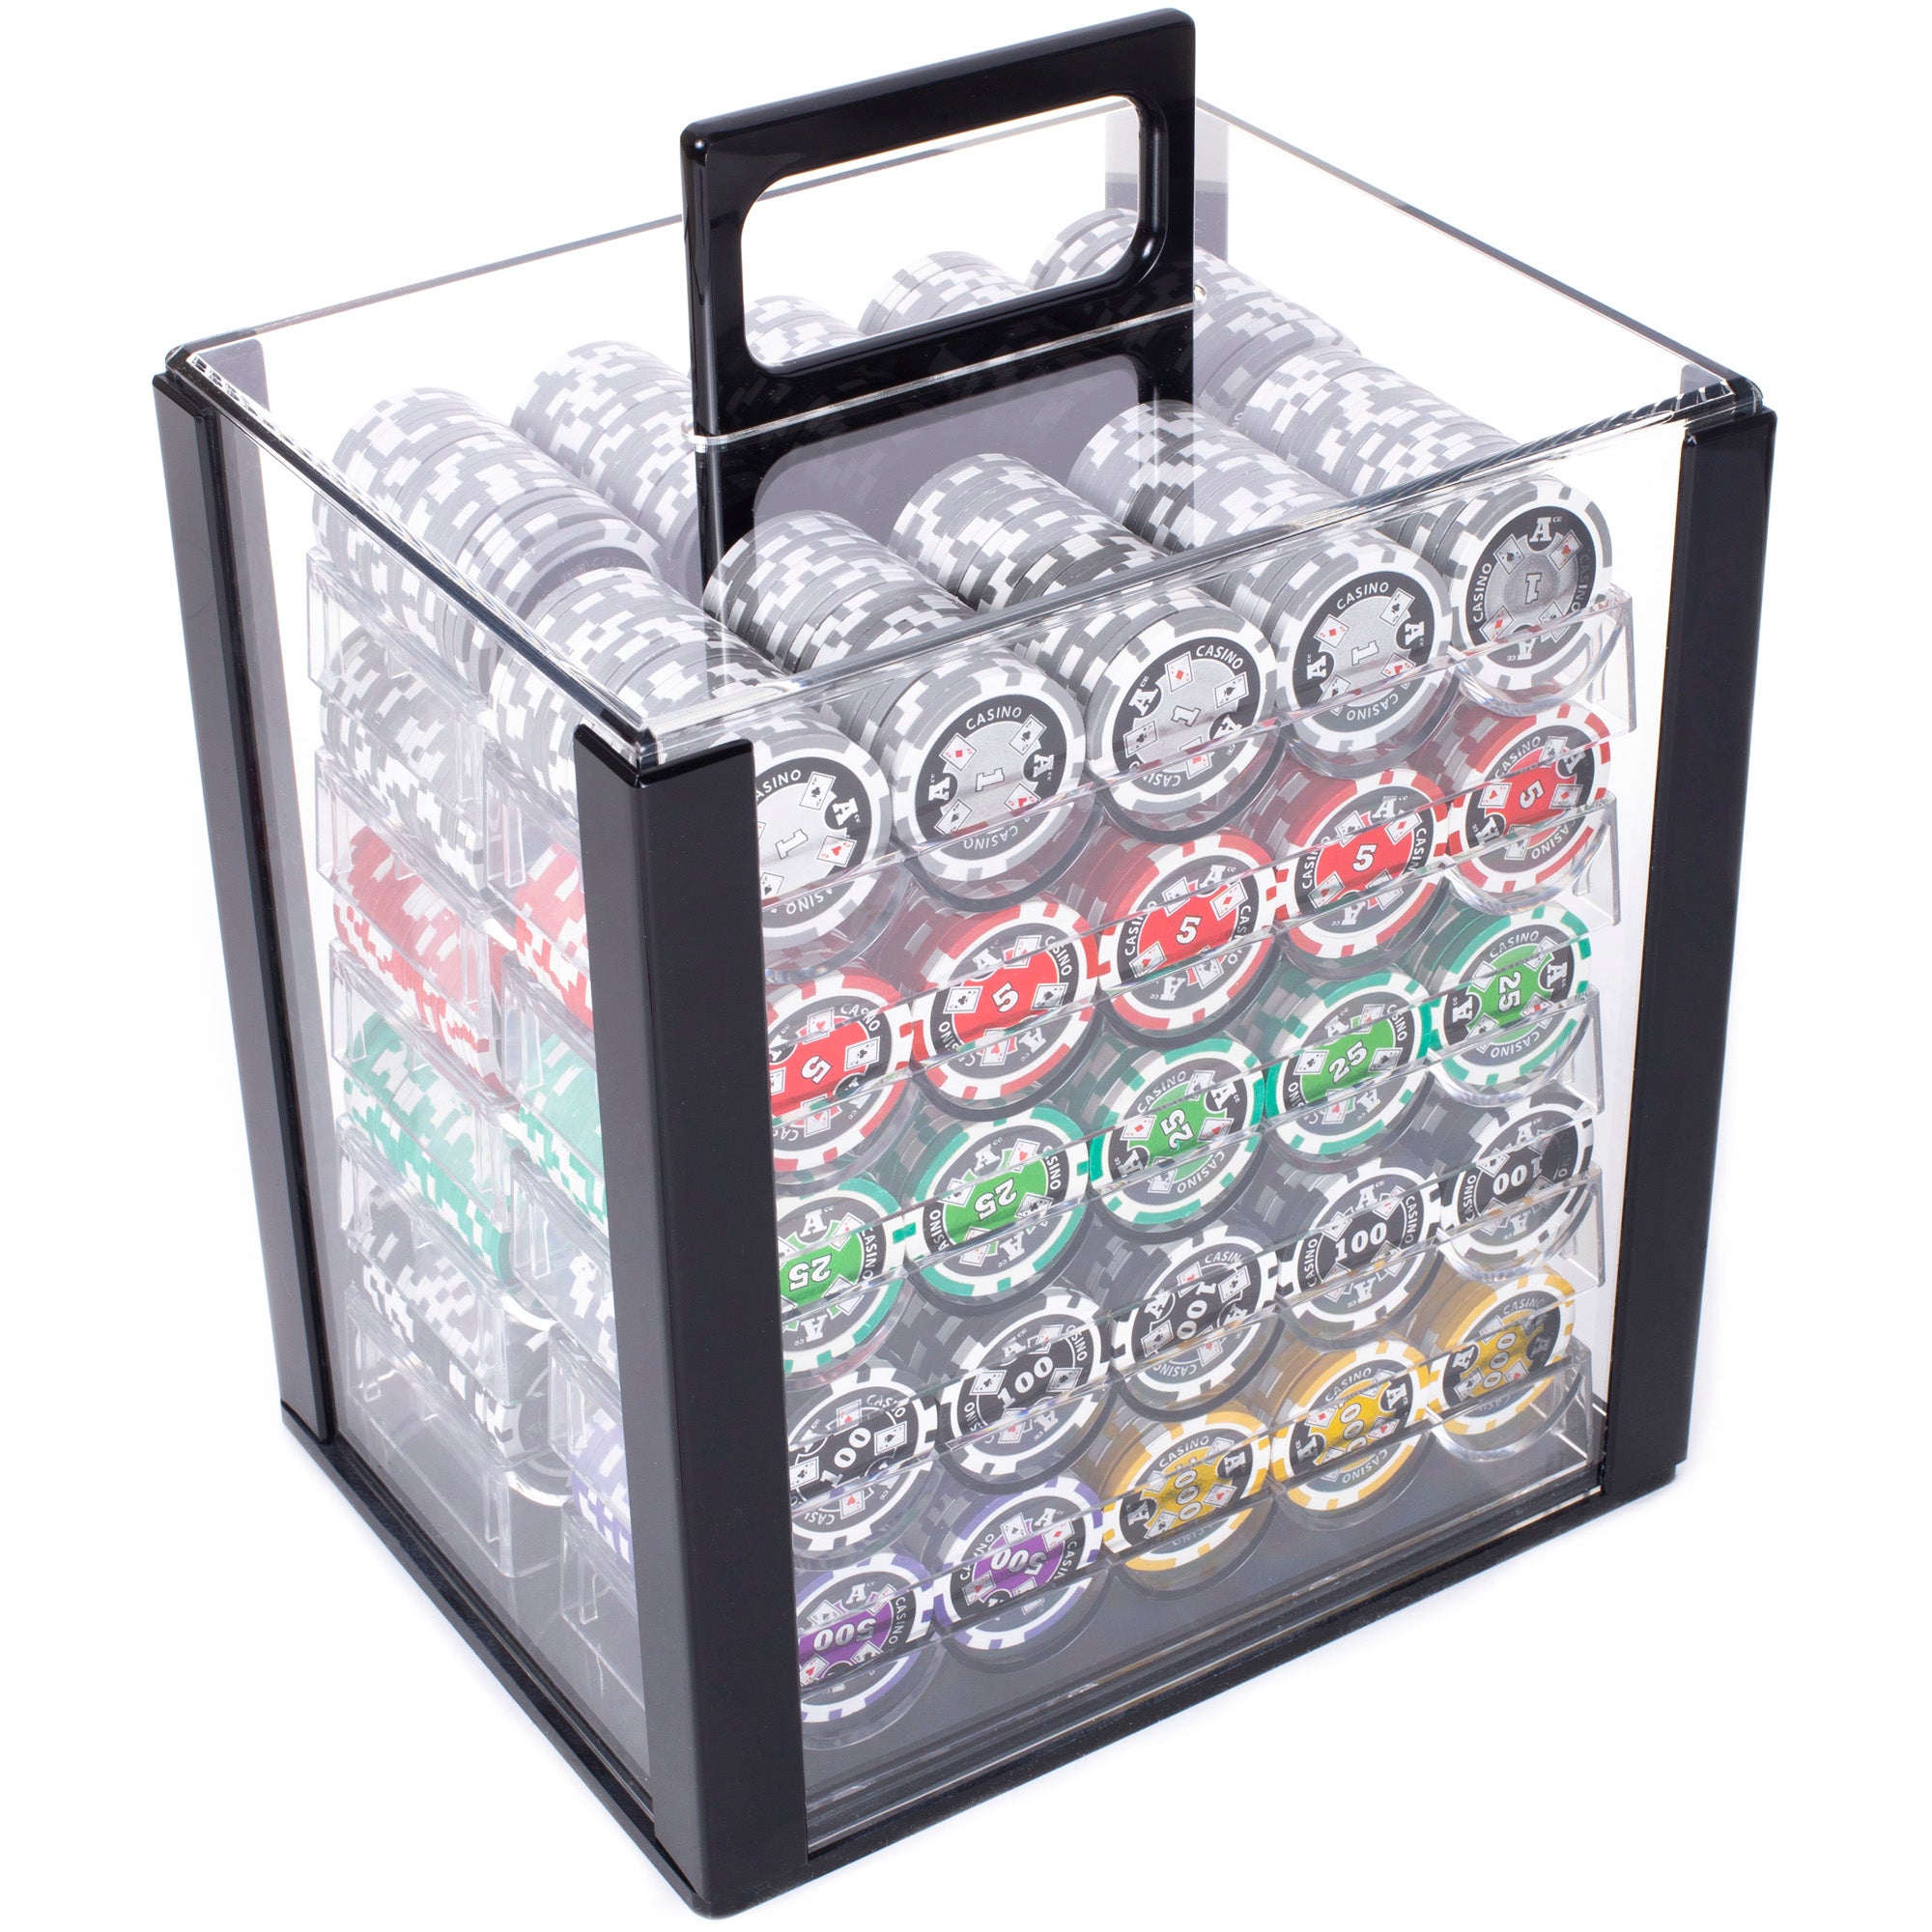 Ace Casino 14-gram Holo Inlay Poker Chip Set in Acrylic Case (1000 Count)